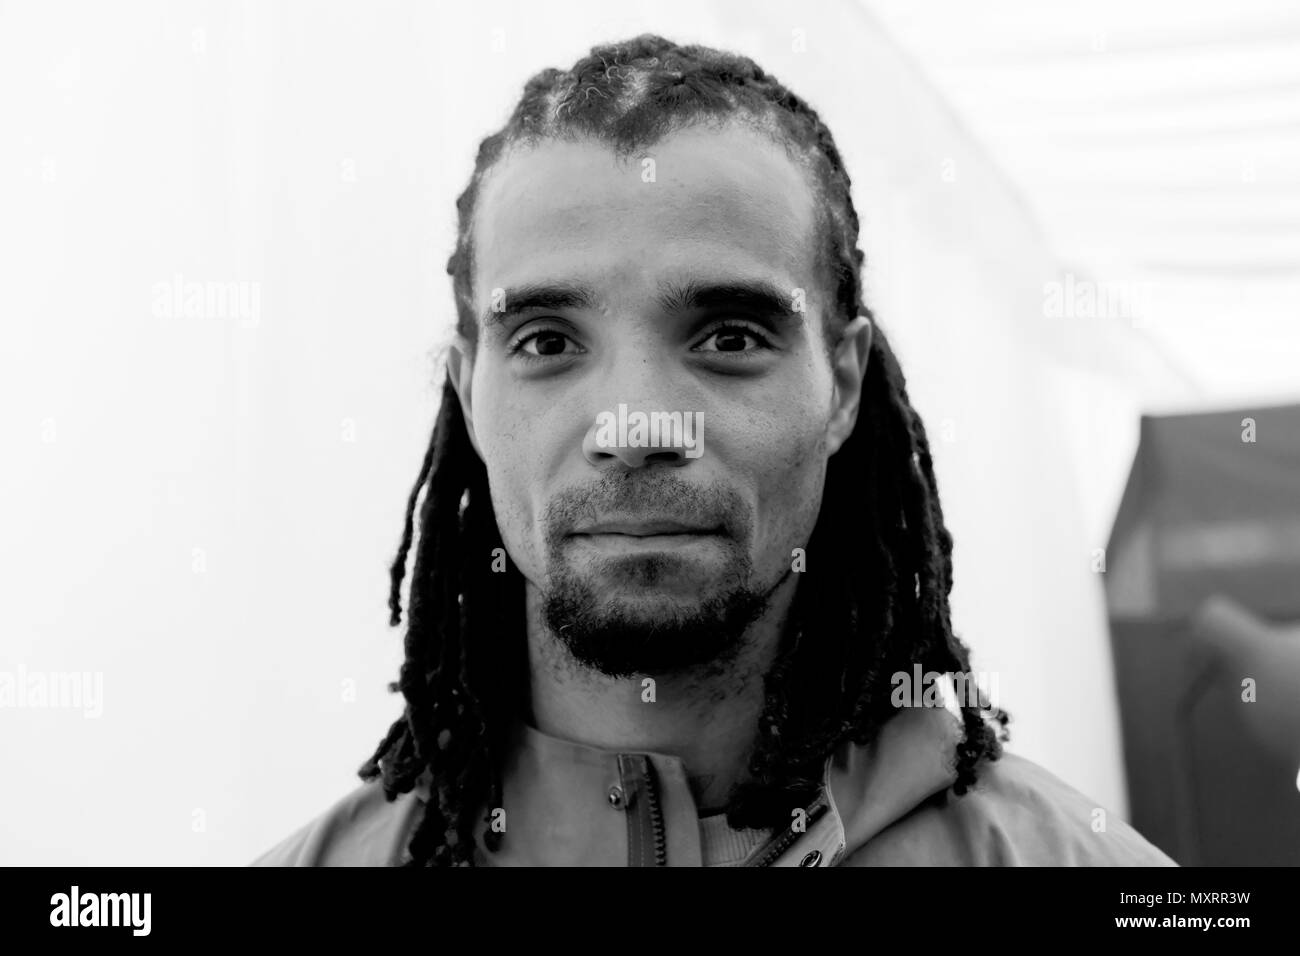 Akala portrait of author at the Hay Festival UK bookstore book  'Natives: Race and Class in the Ruins of Empire'   May 2018 Hay-on-Wye  KATHY DEWITT Stock Photo